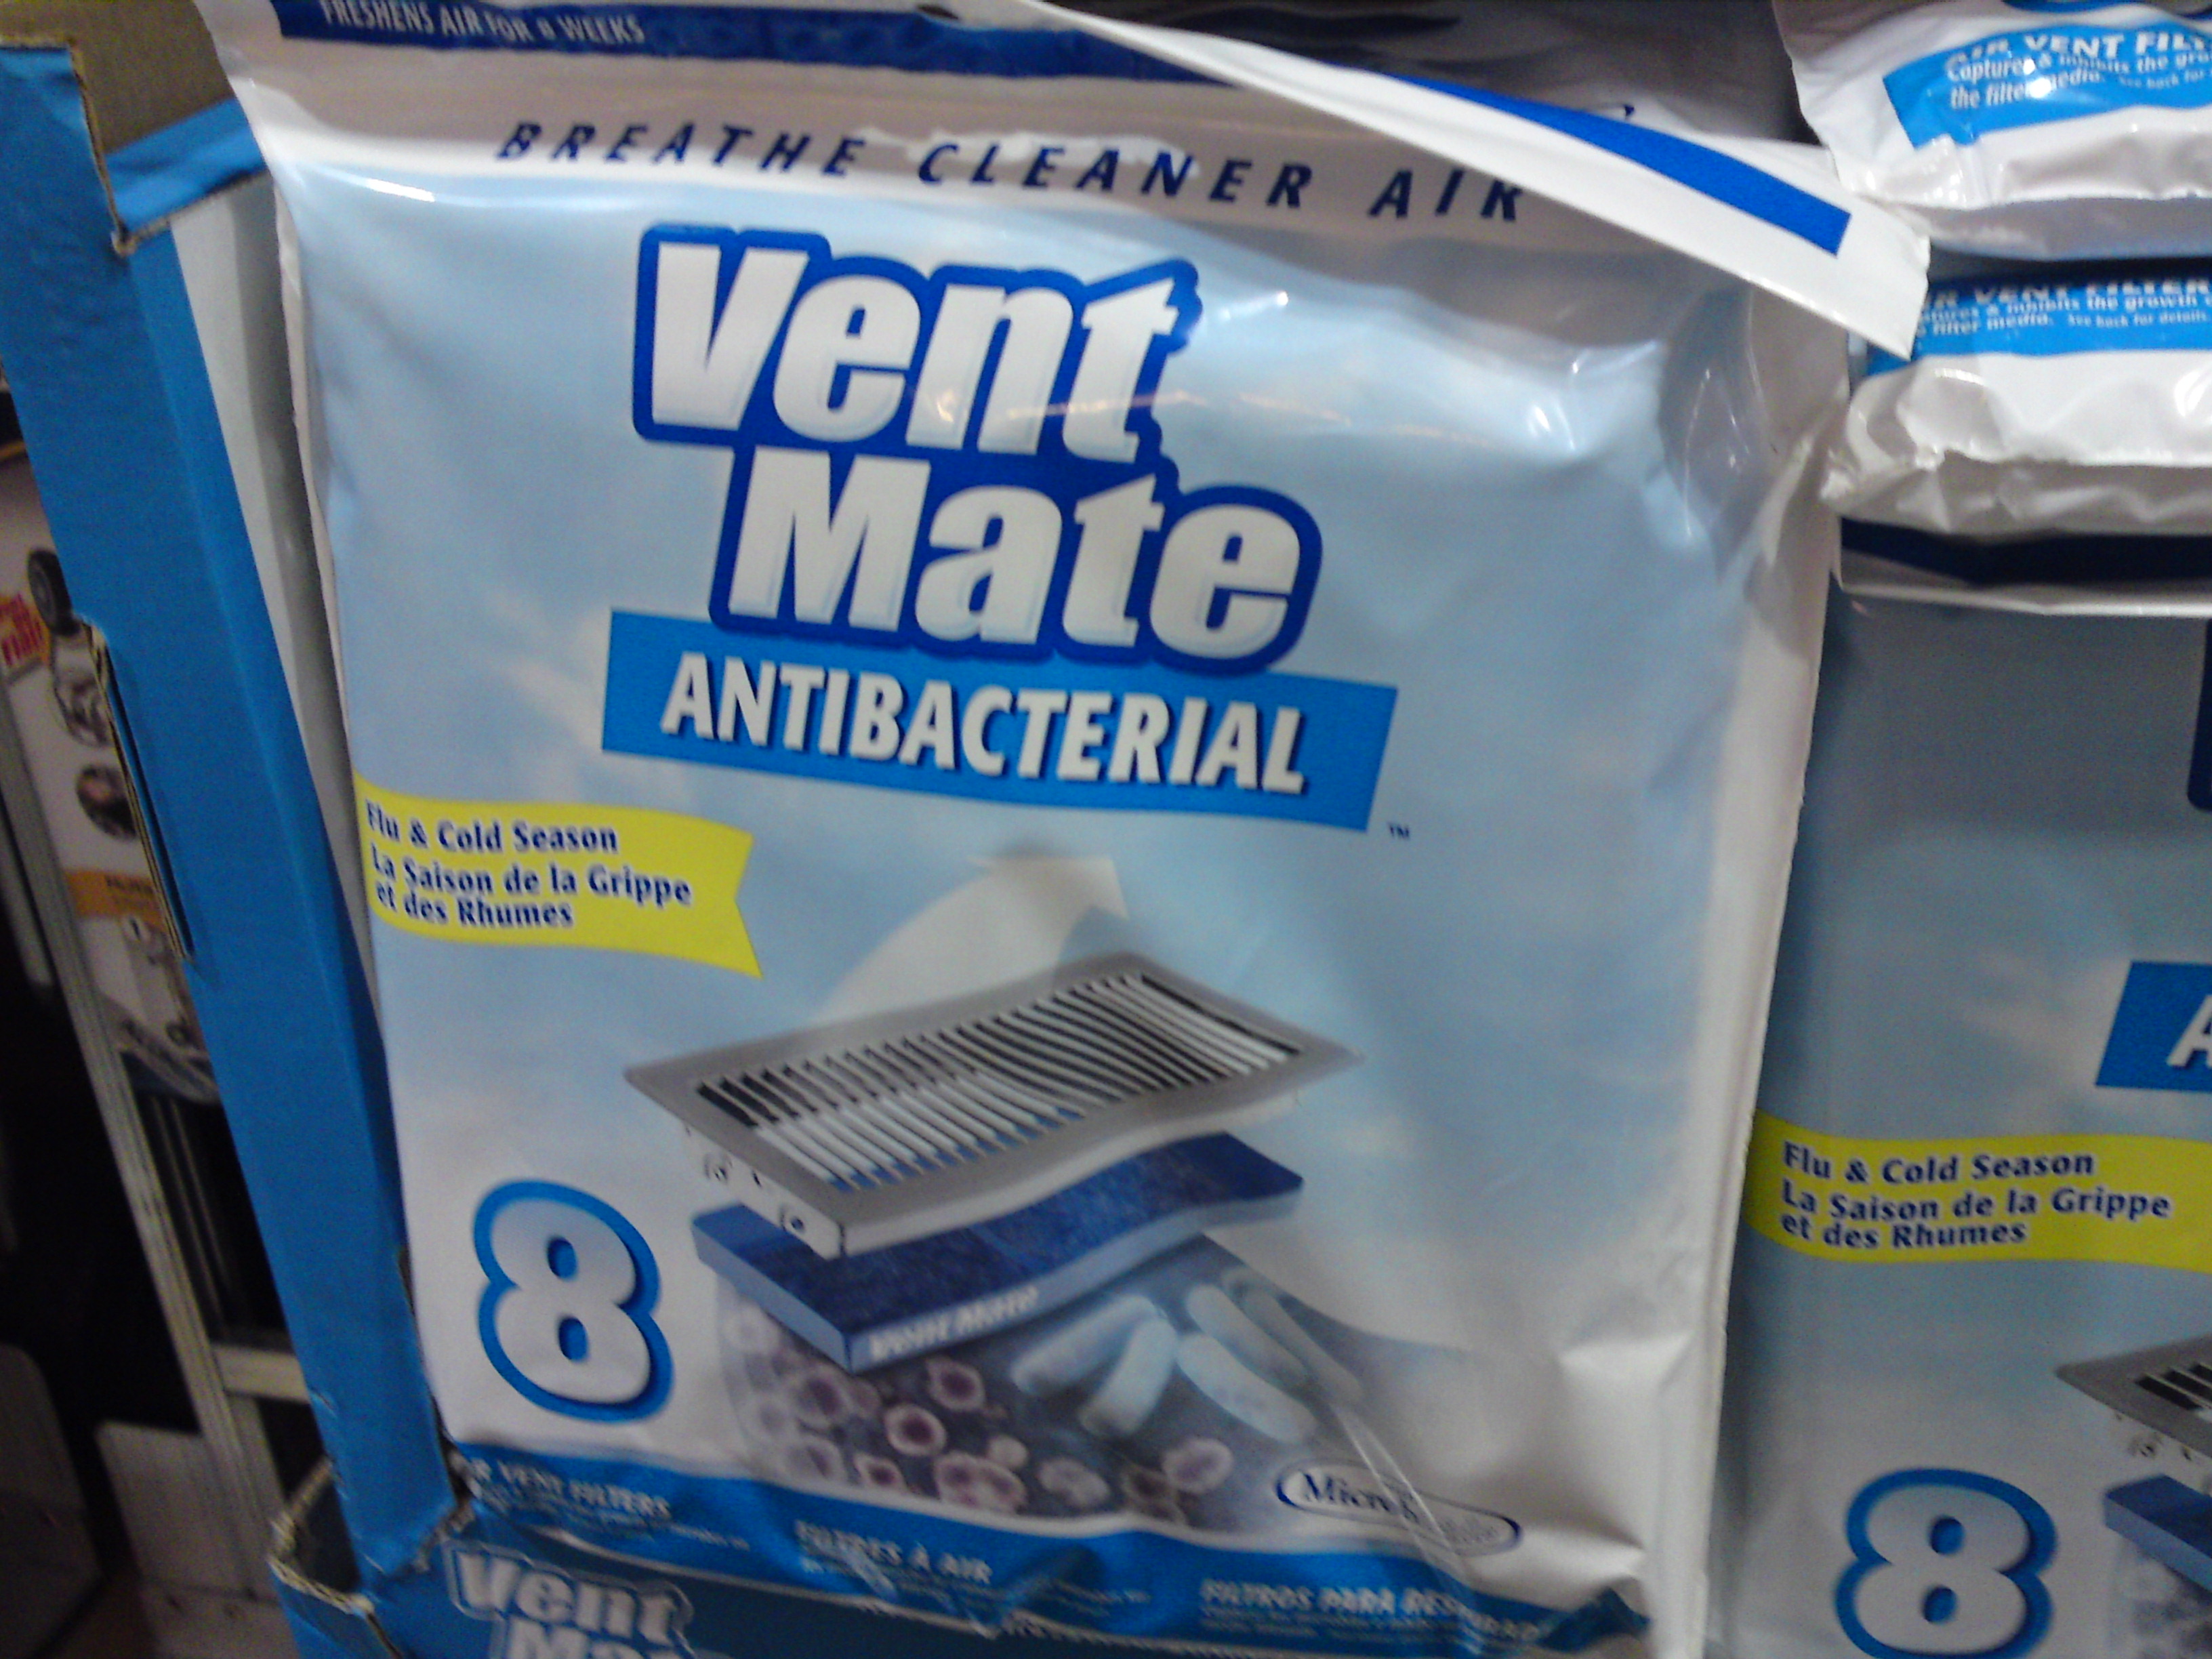 Costco Clearance Vent Mate Antibacterial Register Filters 8 Count 4.97 Frugal Hotspot